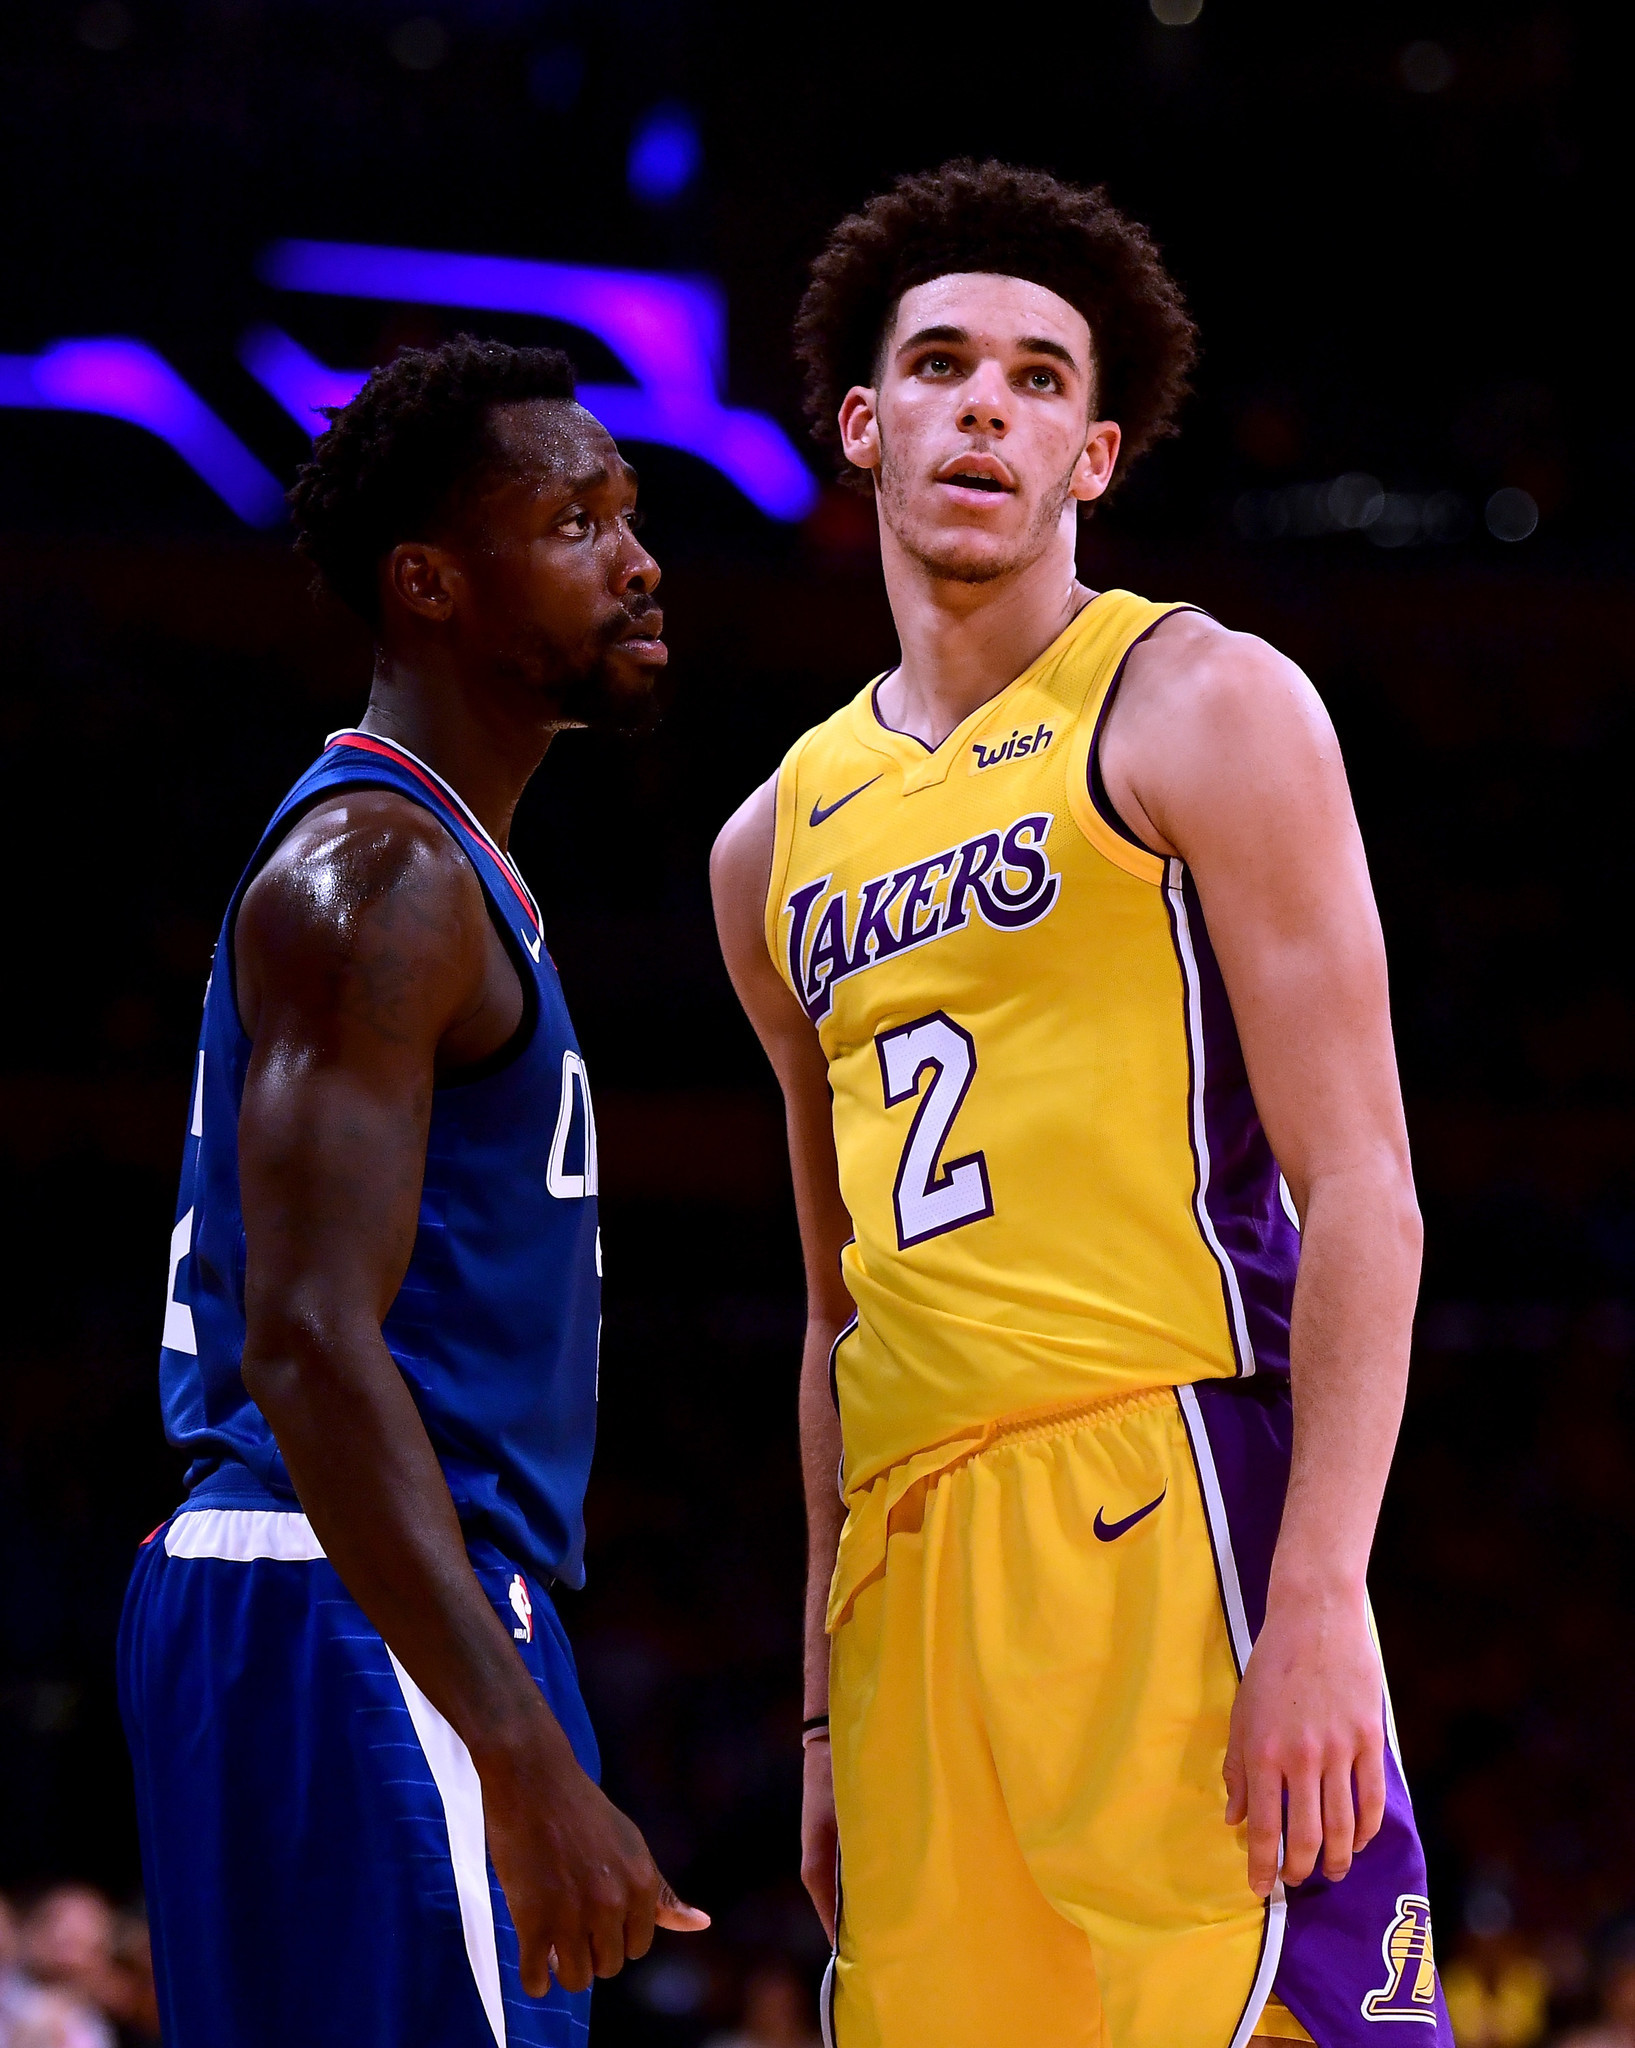 Patrick Beverley shuts down Lonzo Ball, and then stirs up LaVar Ball - Chicago Tribune1635 x 2048